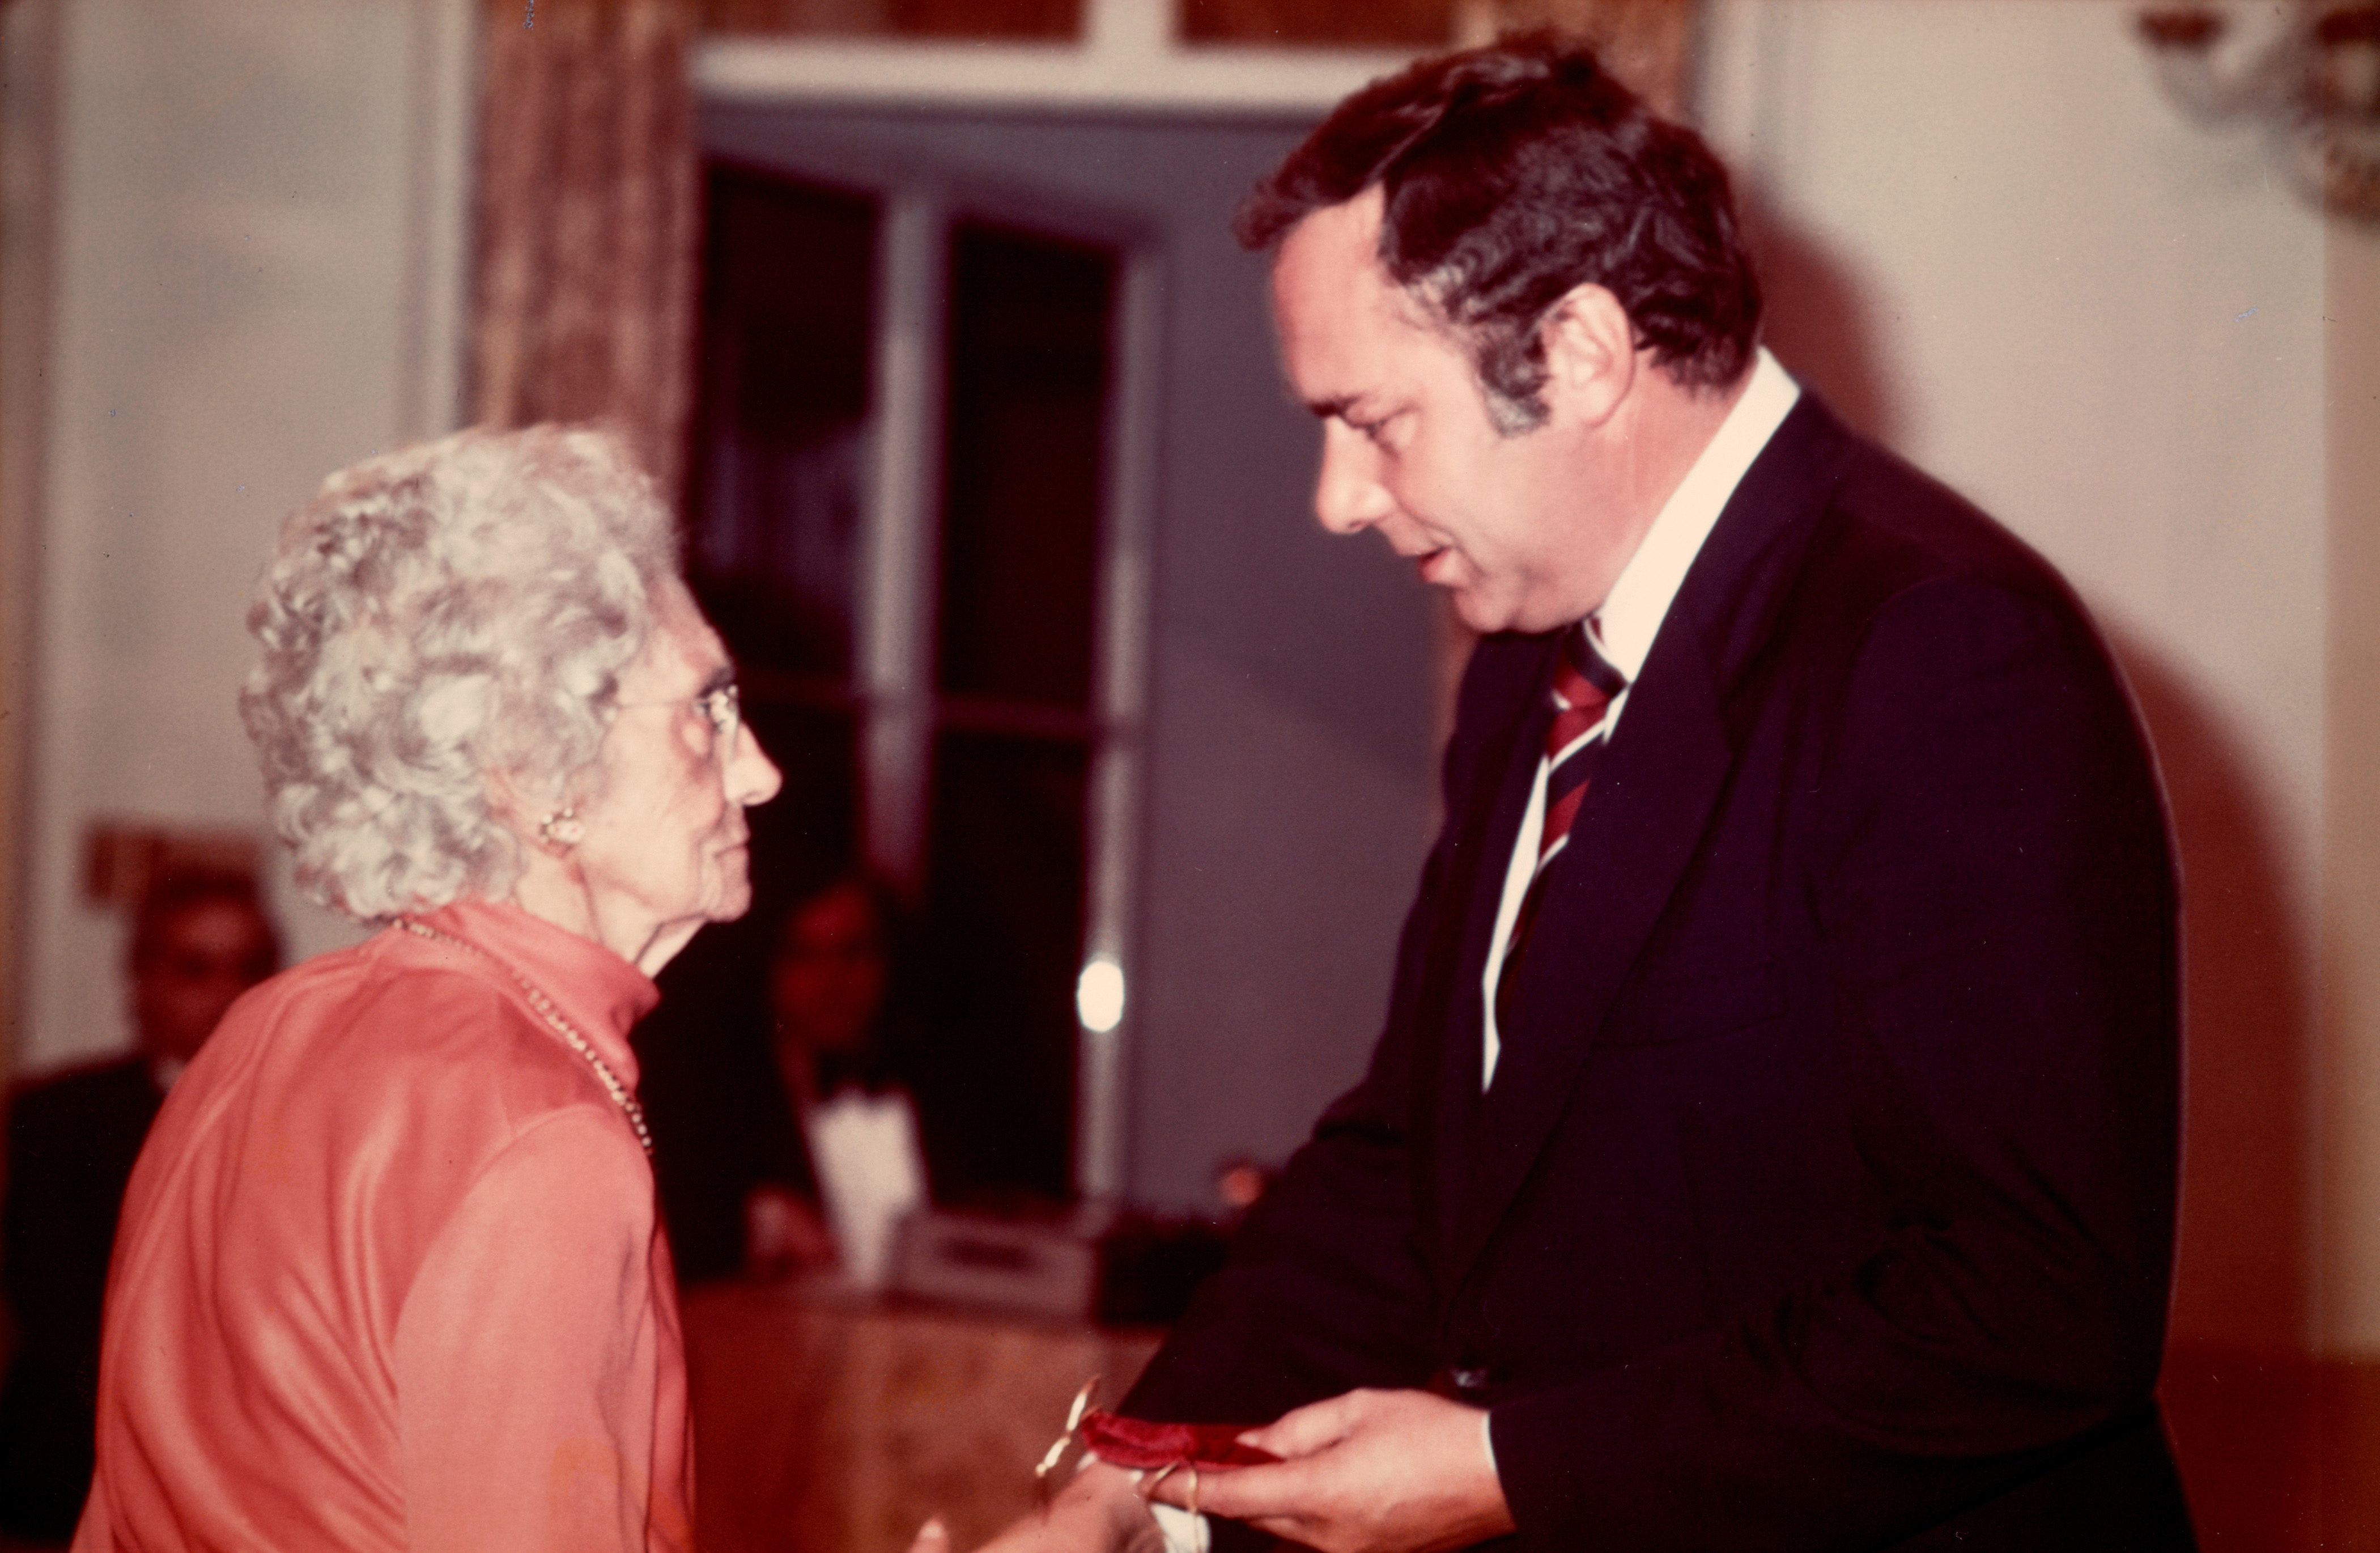 Dr Elizabeth Bagshaw, receives the Governor General's award for the Persons Case in 1979.